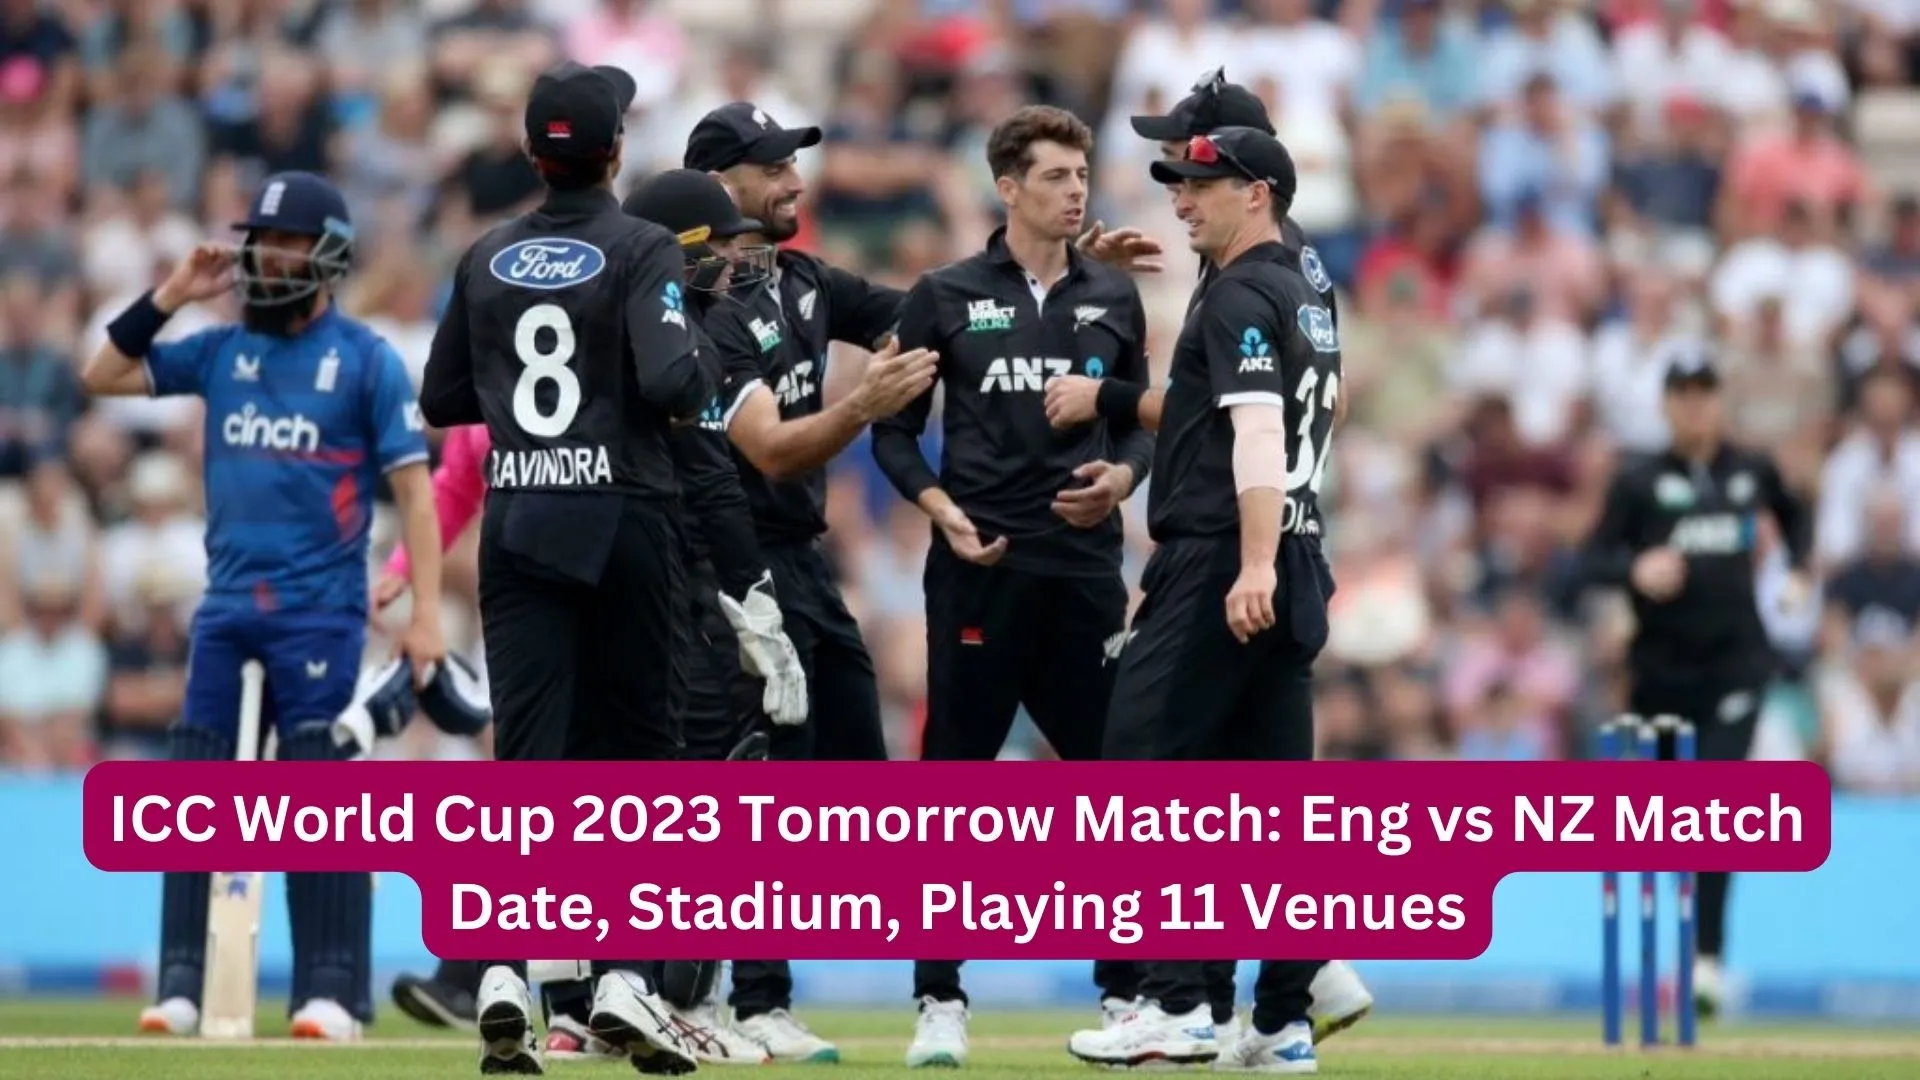 ICC World Cup 2023 Tomorrow Match: Eng vs NZ Match Date, Stadium, Playing 11 Venues